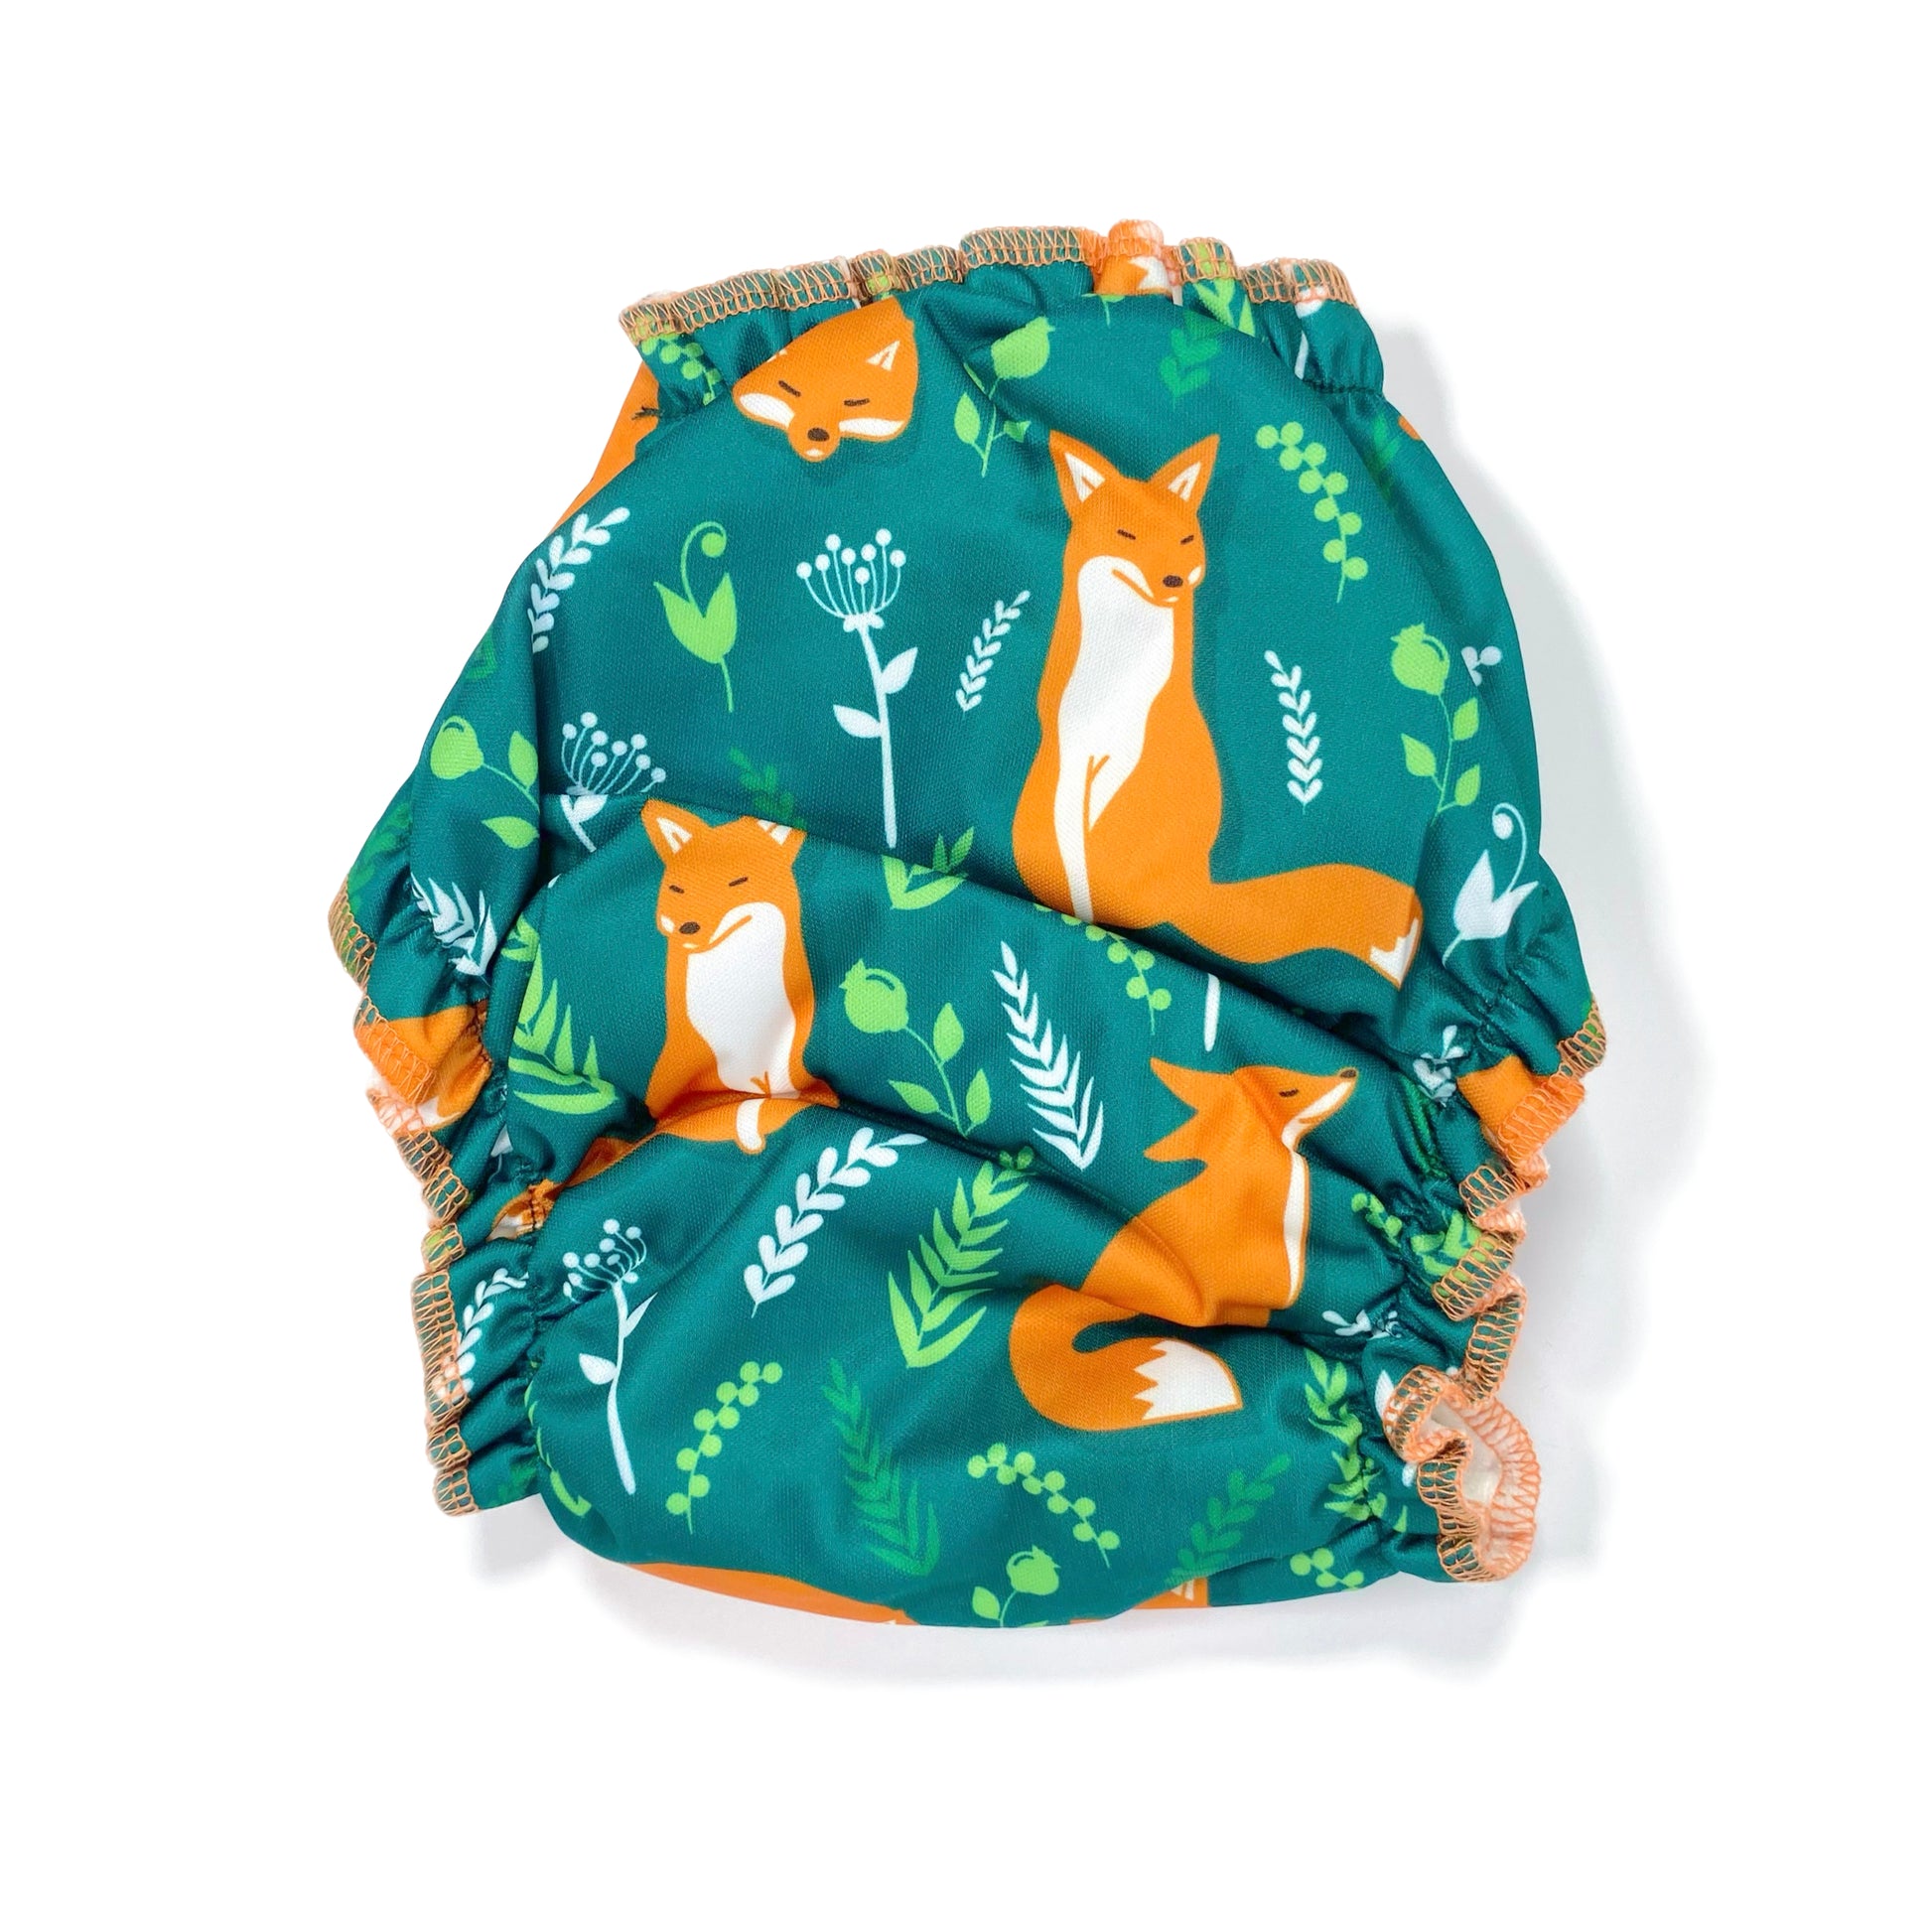 An adjustable reusable nappy for babies and toddlers, featuring a green fox design, with images of foxes on a green background. View shows the back of the nappy.